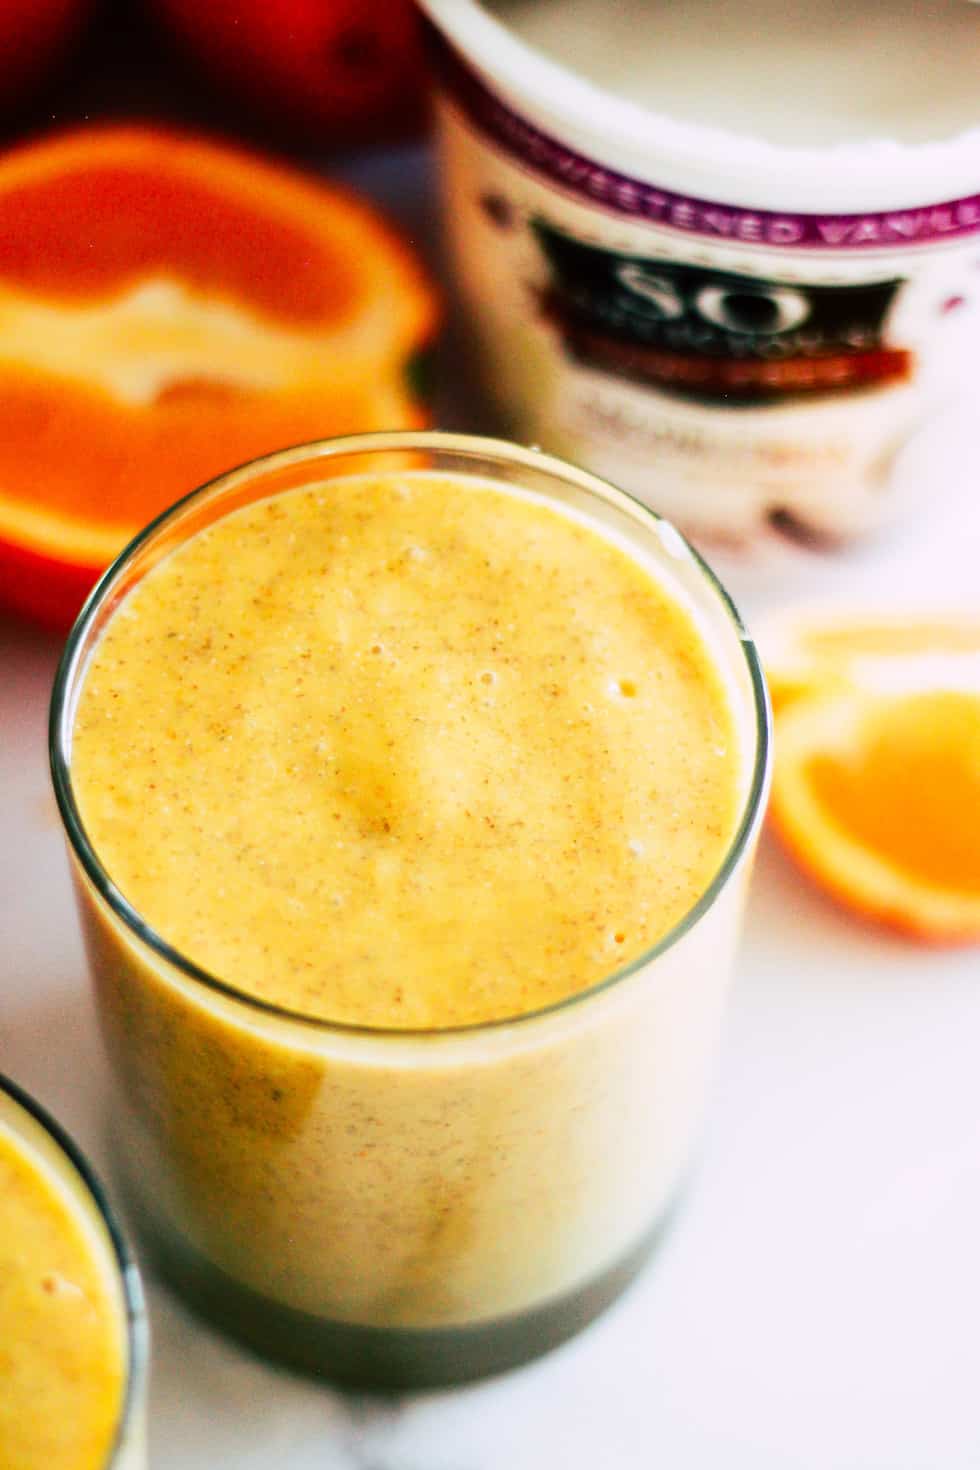 Orange Smoothie in a glass in front of oranges and a container of So Delicious yogurt.